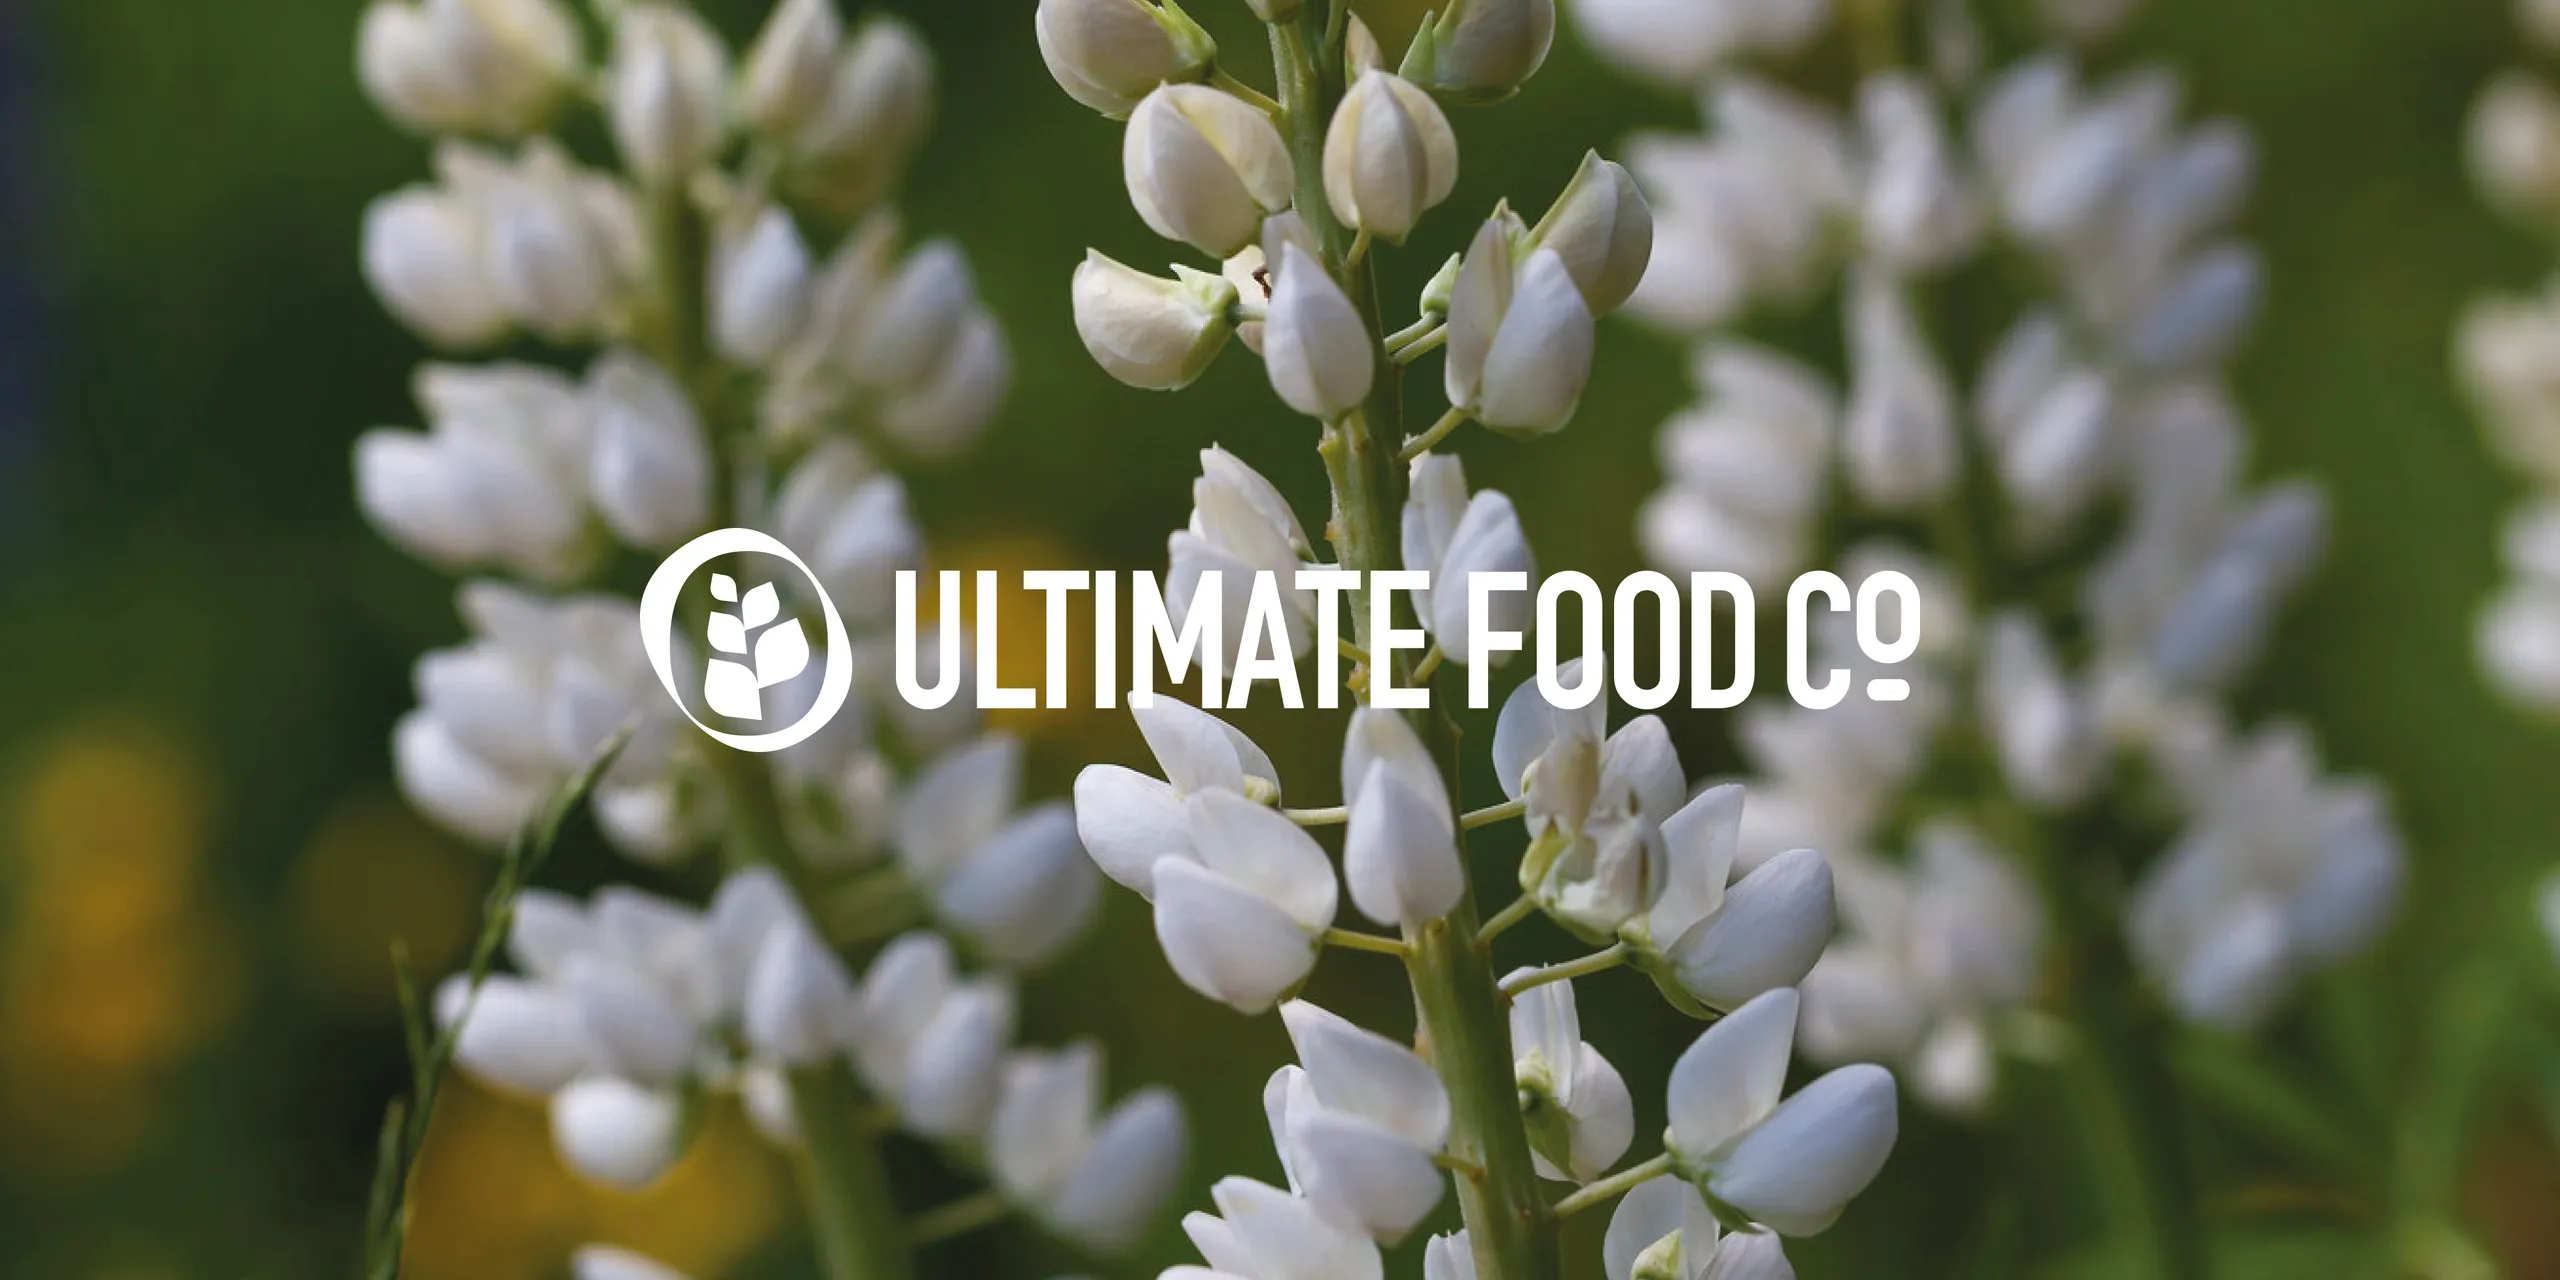 Ultimate Food Company logo in white on a green ground